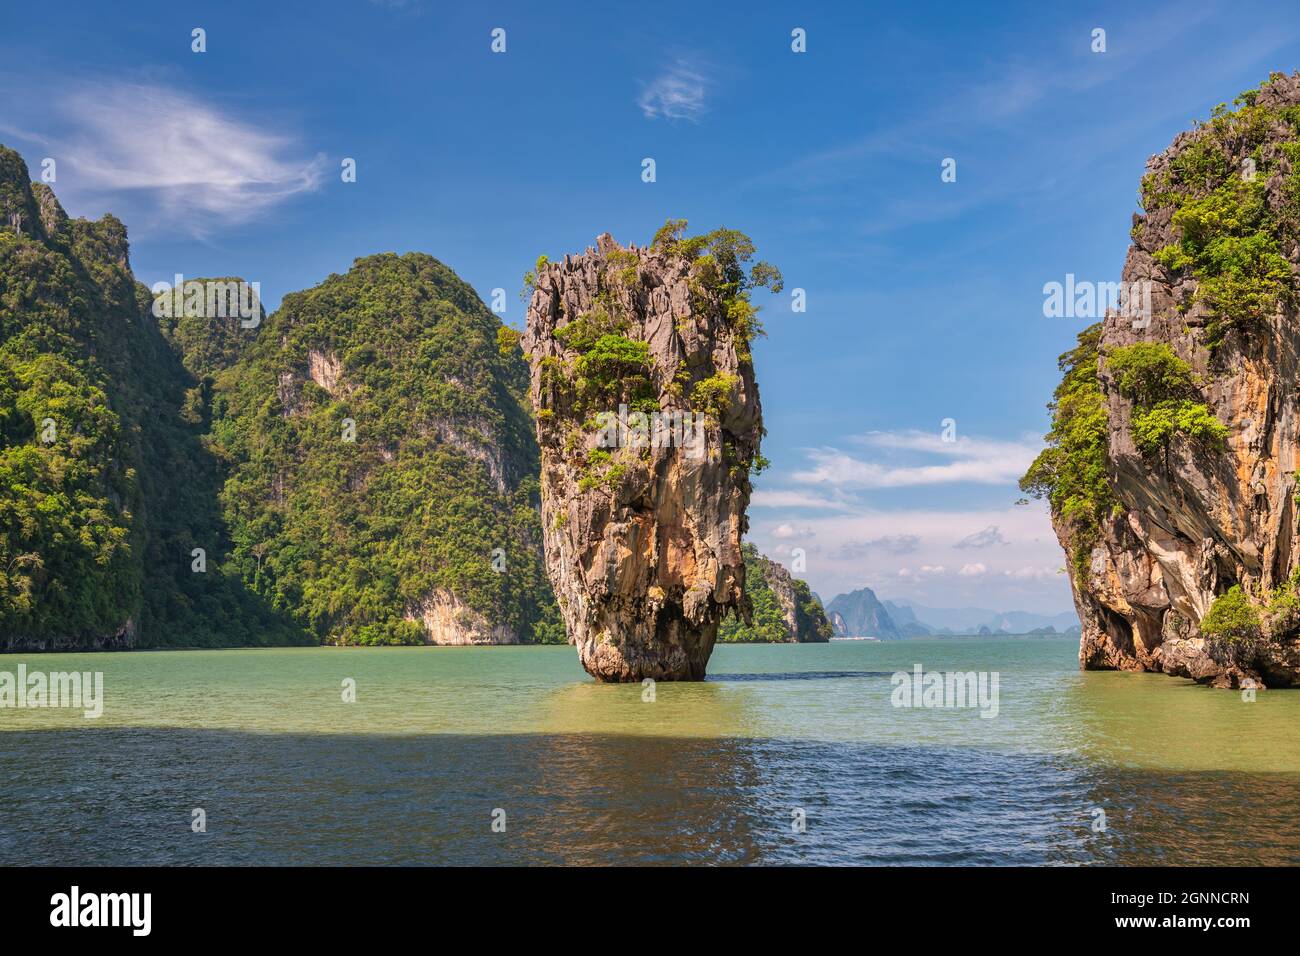 Tropical islands view at James bond island (Khao Tapu) with ocean blue sea water, Phang Nga Thailand nature landscape Stock Photo